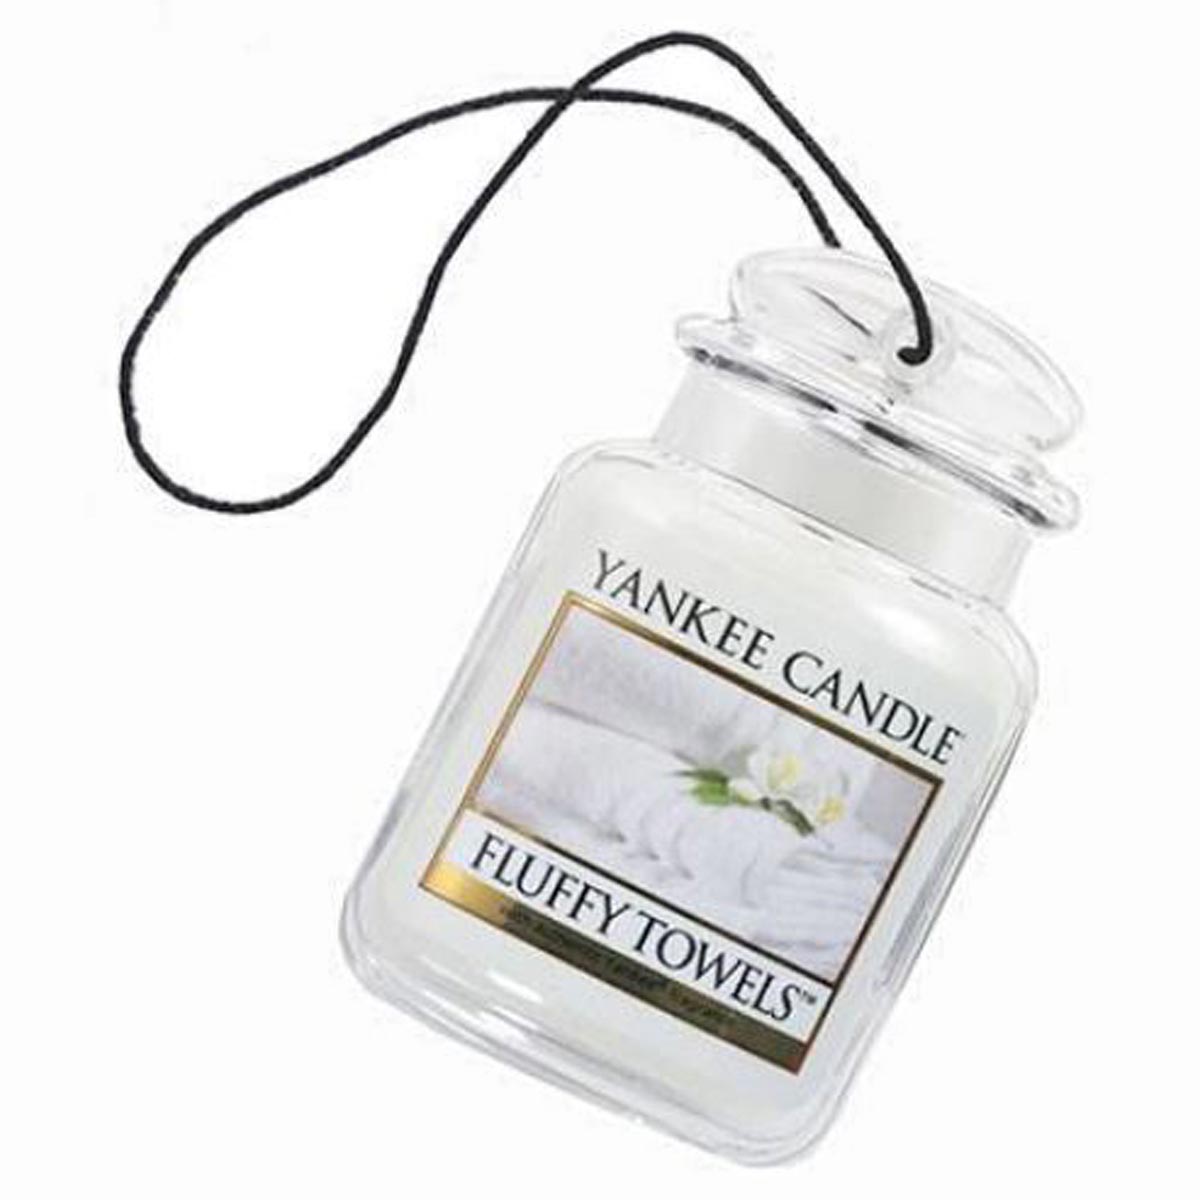 Yankee Candle 3D Jar Fluffy Towels - White